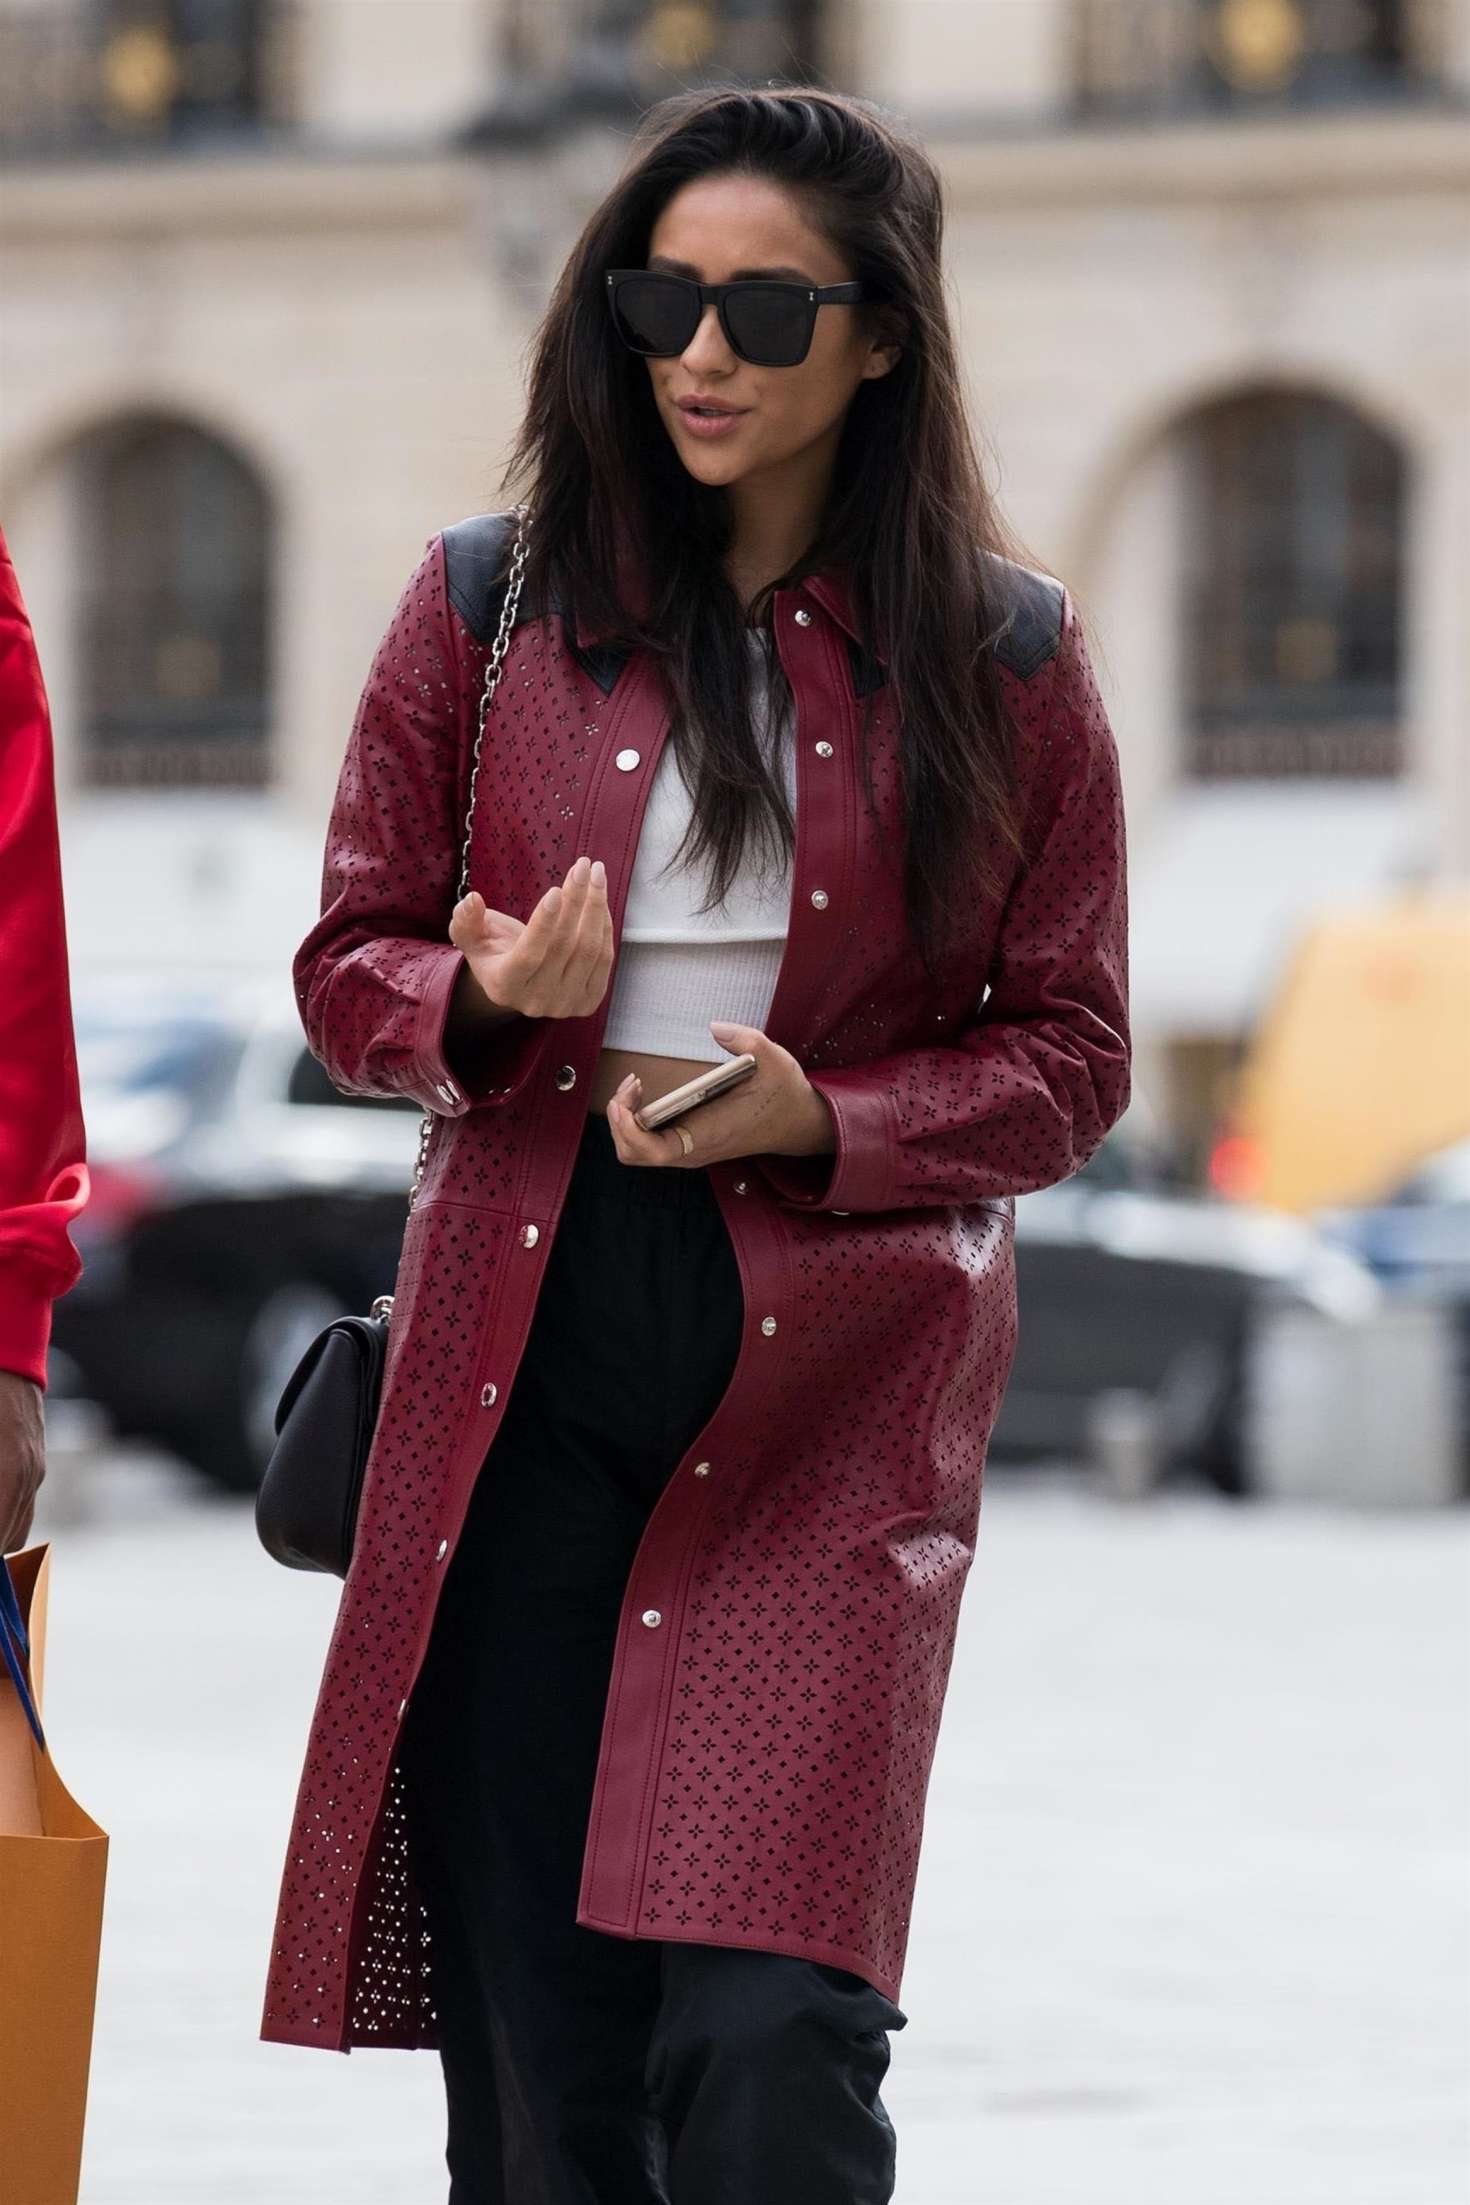 Shay Mitchell - Shopping in Paris